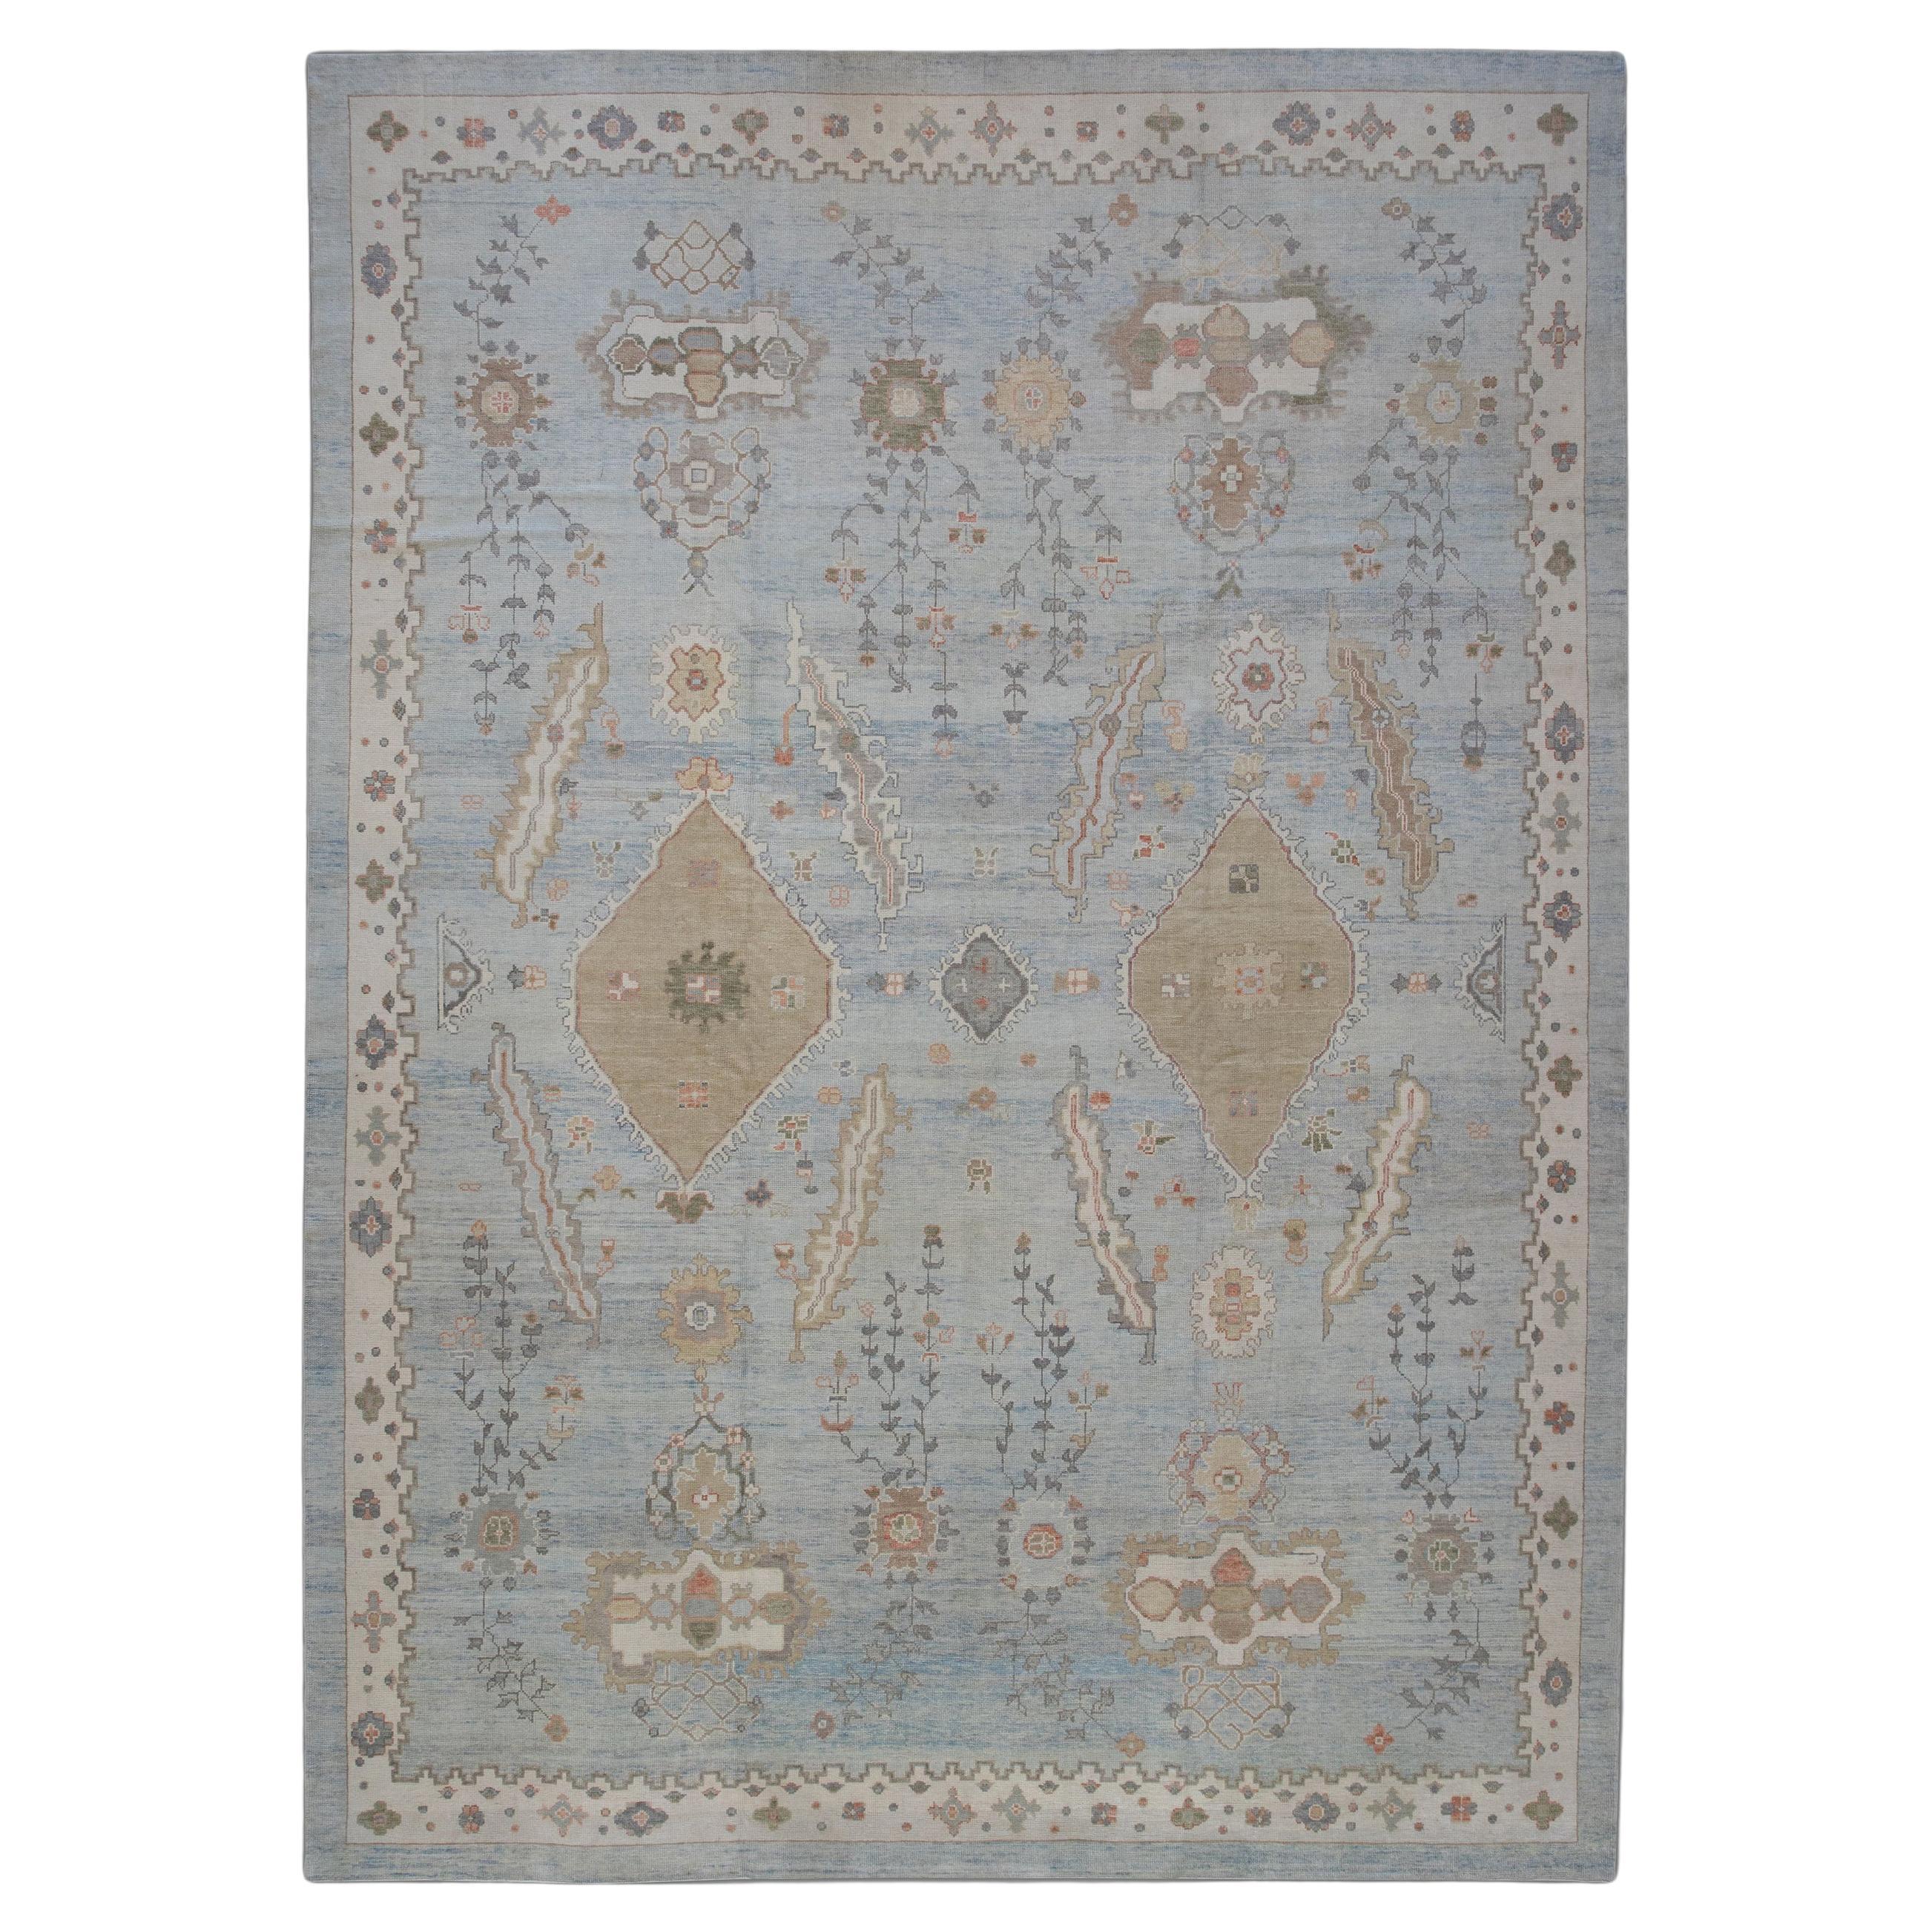 Blue & Brown Floral Handwoven Wool Oversized Turkish Oushak Rug 12'6" X 17'1"